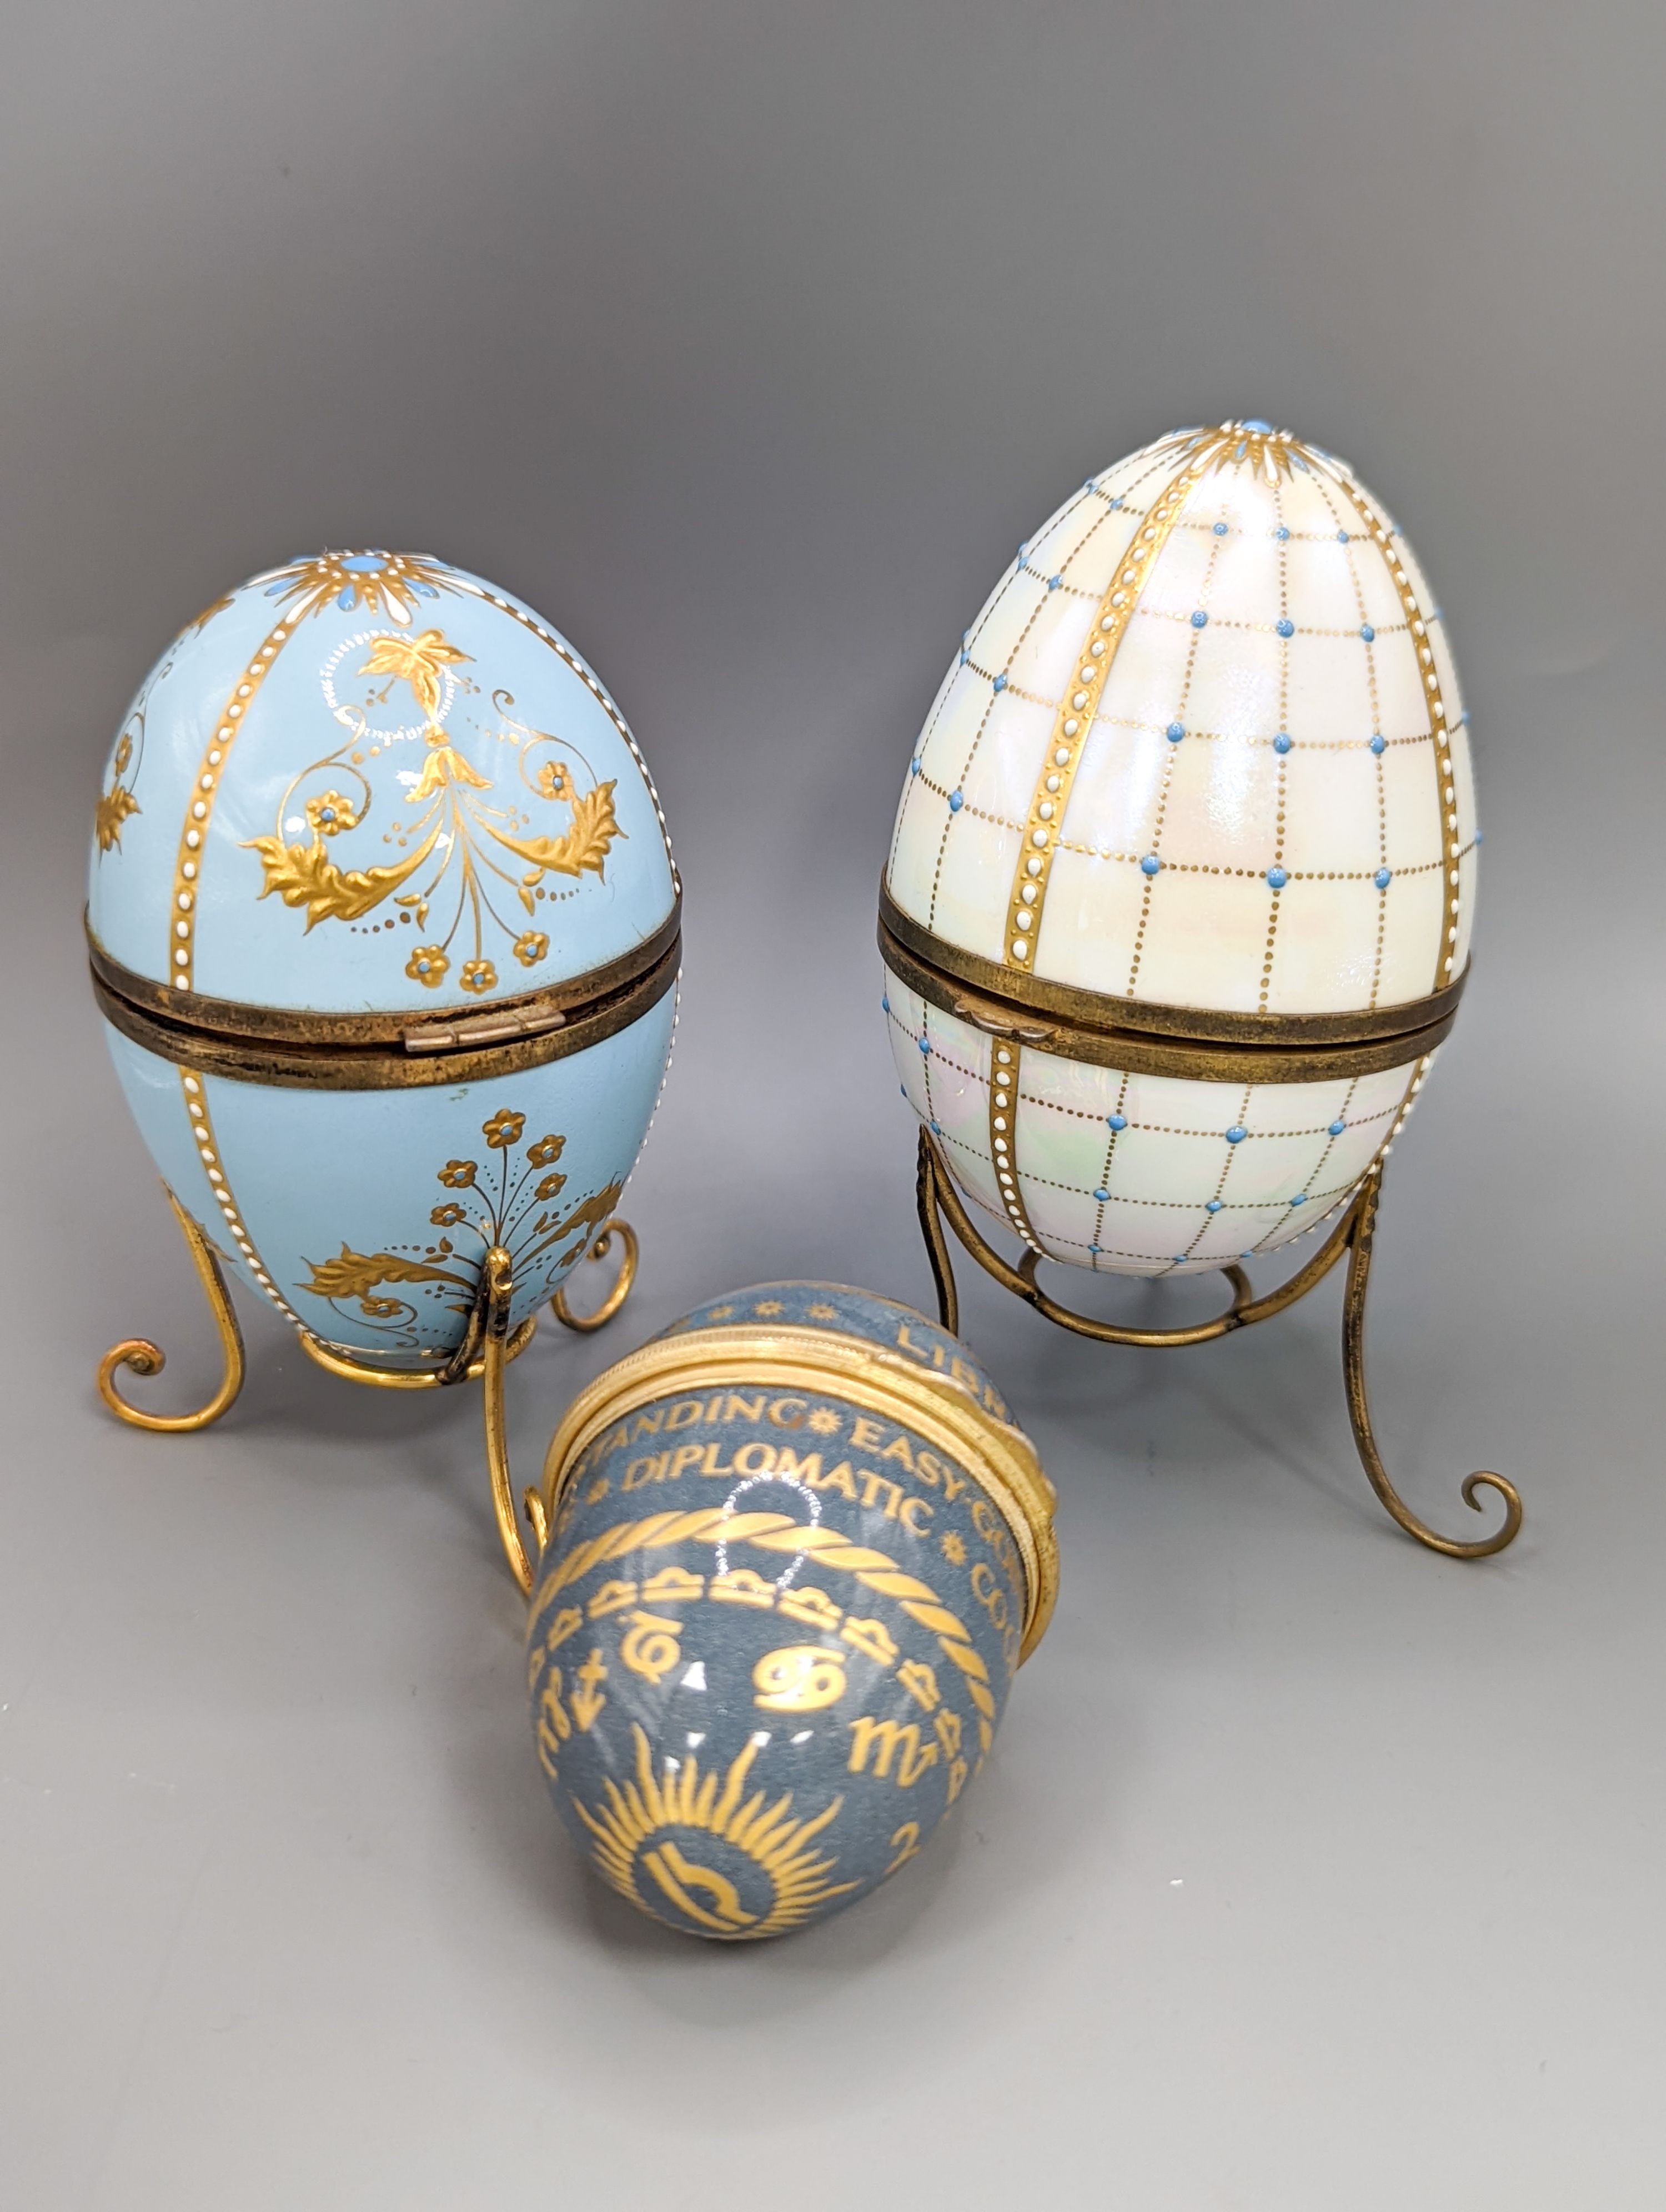 Two silver gilt mounted enamelled eggs with interior seascapes, on silver gilt stands, Birmingham, 1985 & 7 and a smaller similar gilt metal mounted zodiac egg, tallest 8.5cm